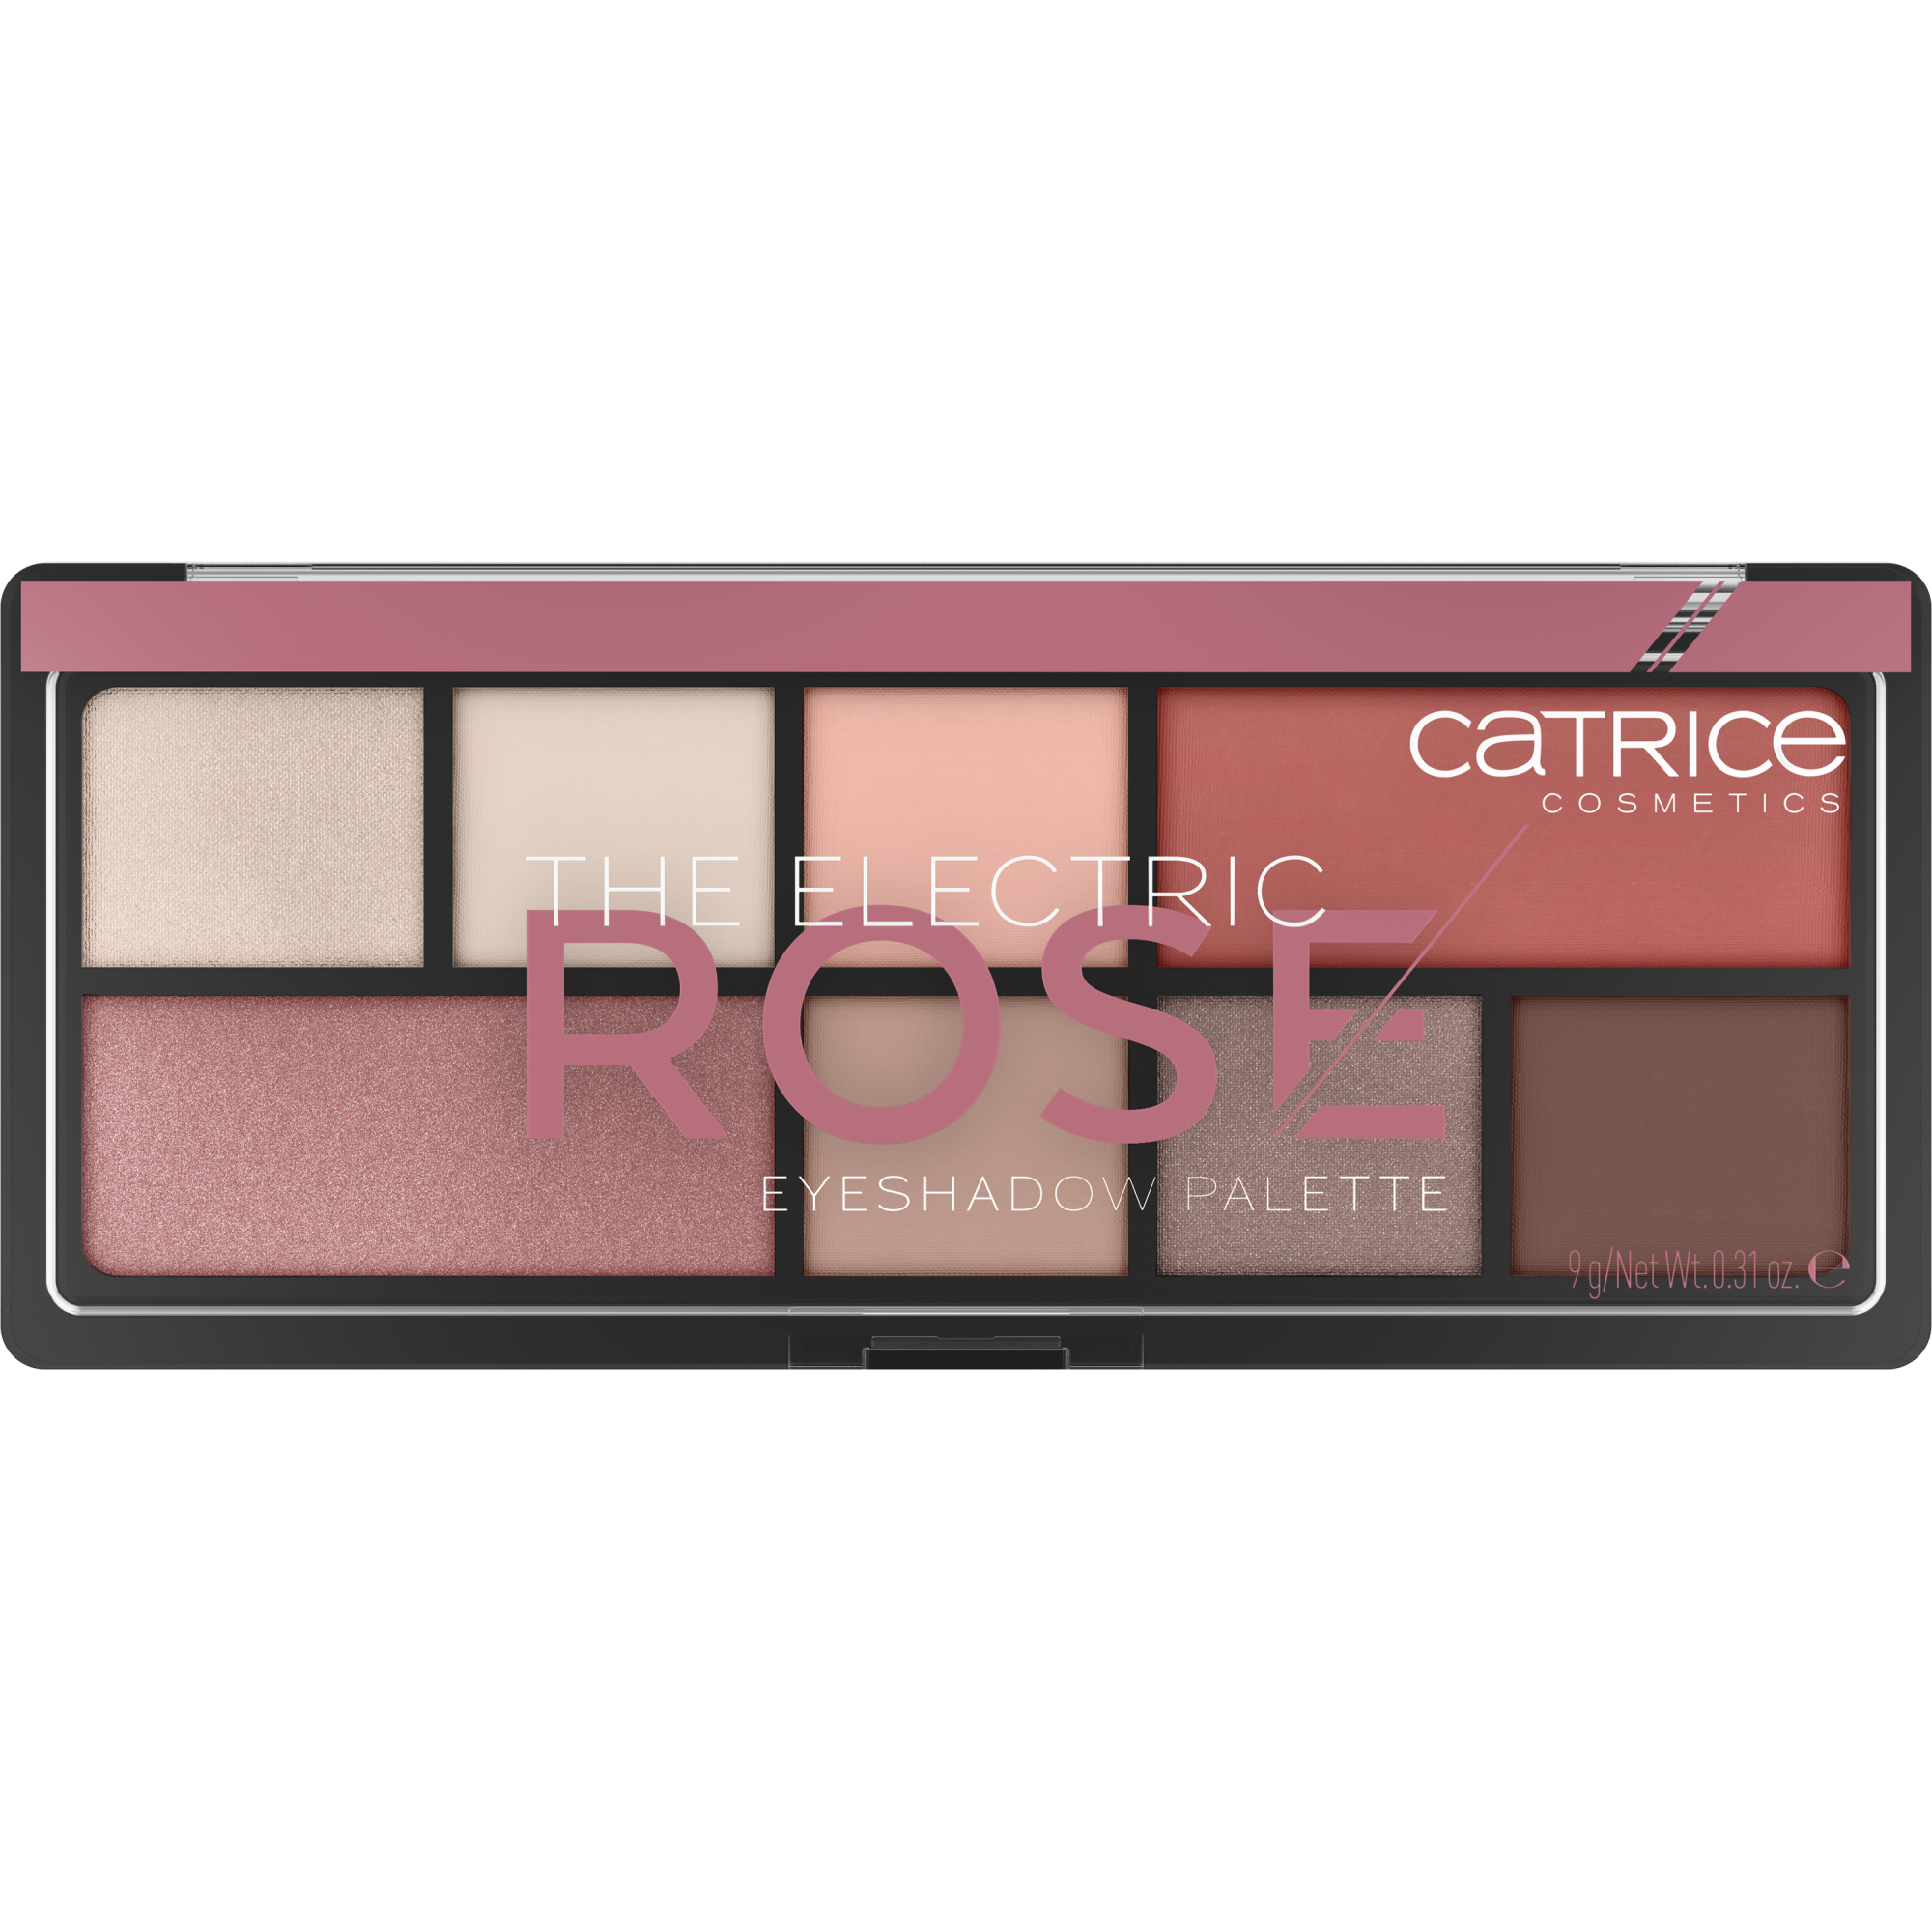 Bảng phấn mắt The Electric Rose Eyeshadow Palette